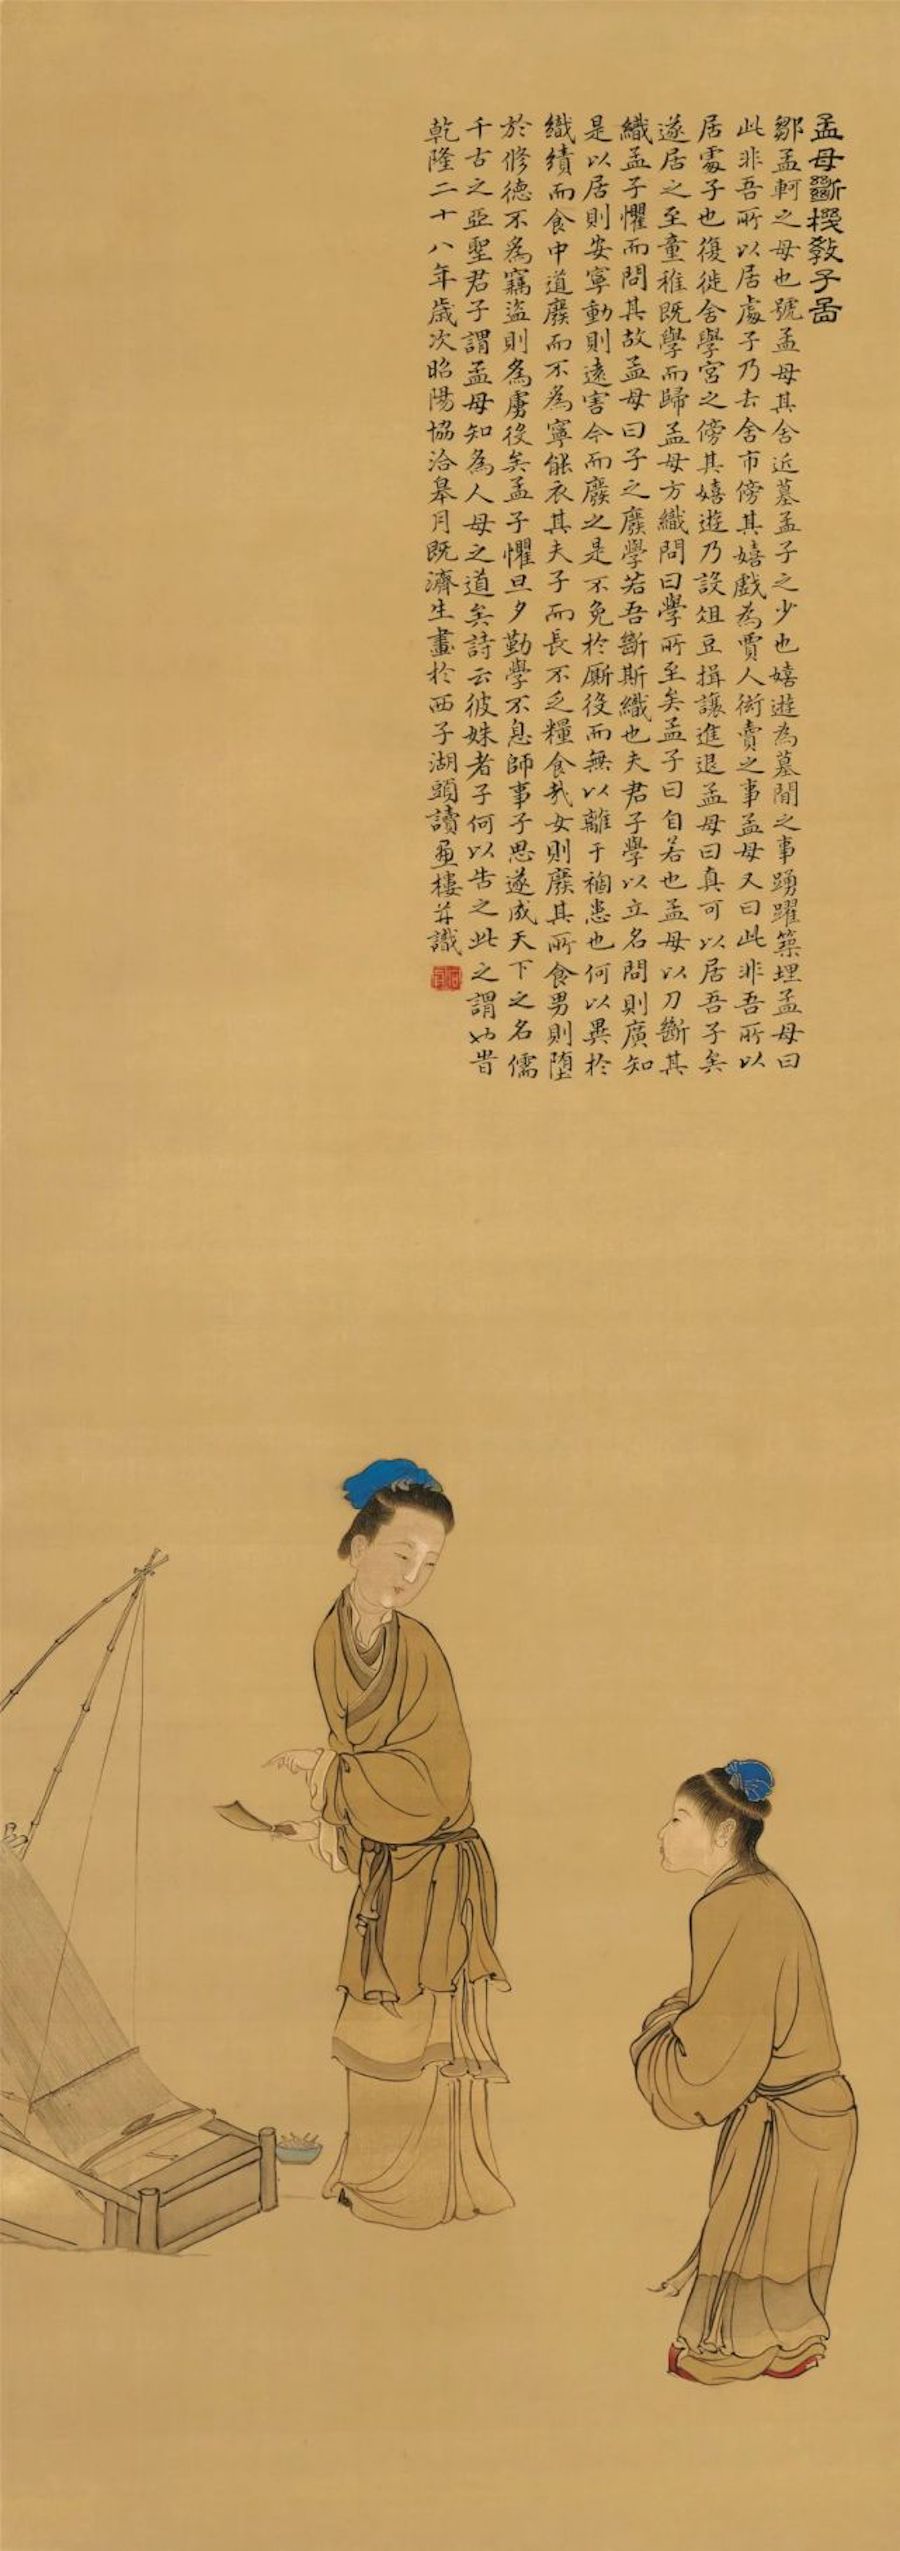 Qing Kang Tao's "Meng's Mother Breaking Machines and Teaching Children" in the collection of the Palace Museum, Beijing